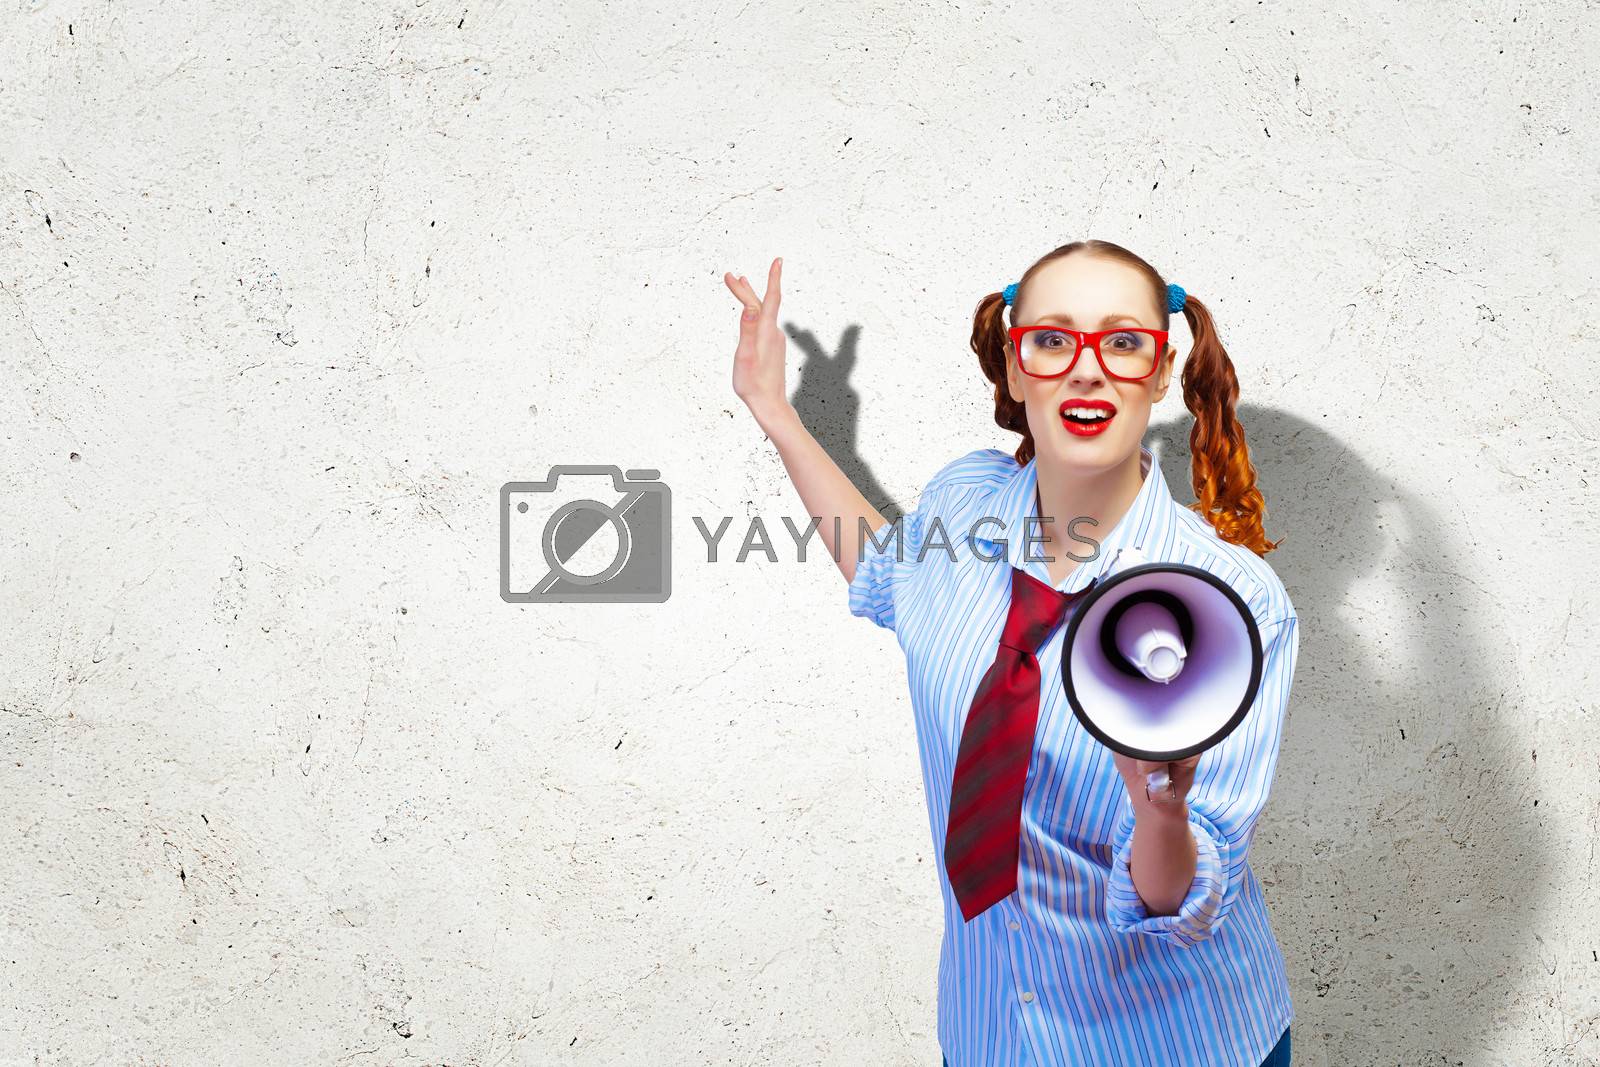 Royalty free image of Funny looking woman with megaphone by sergey_nivens